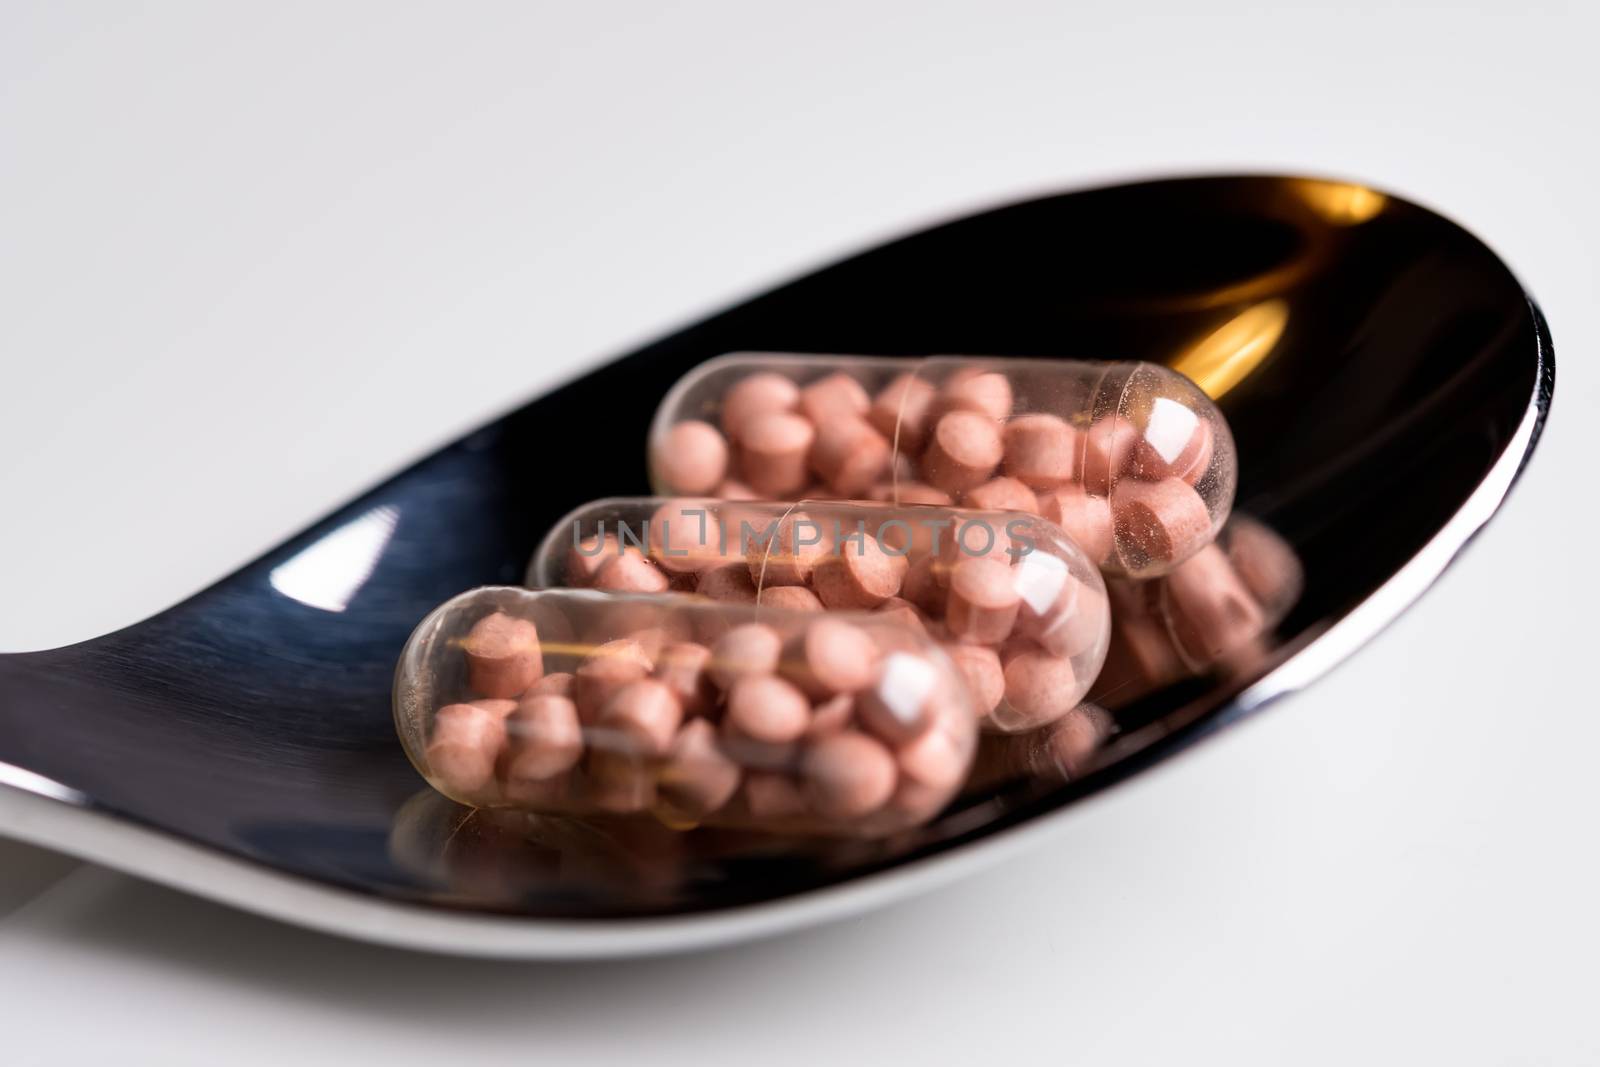 Tablets on a spoon by w20er